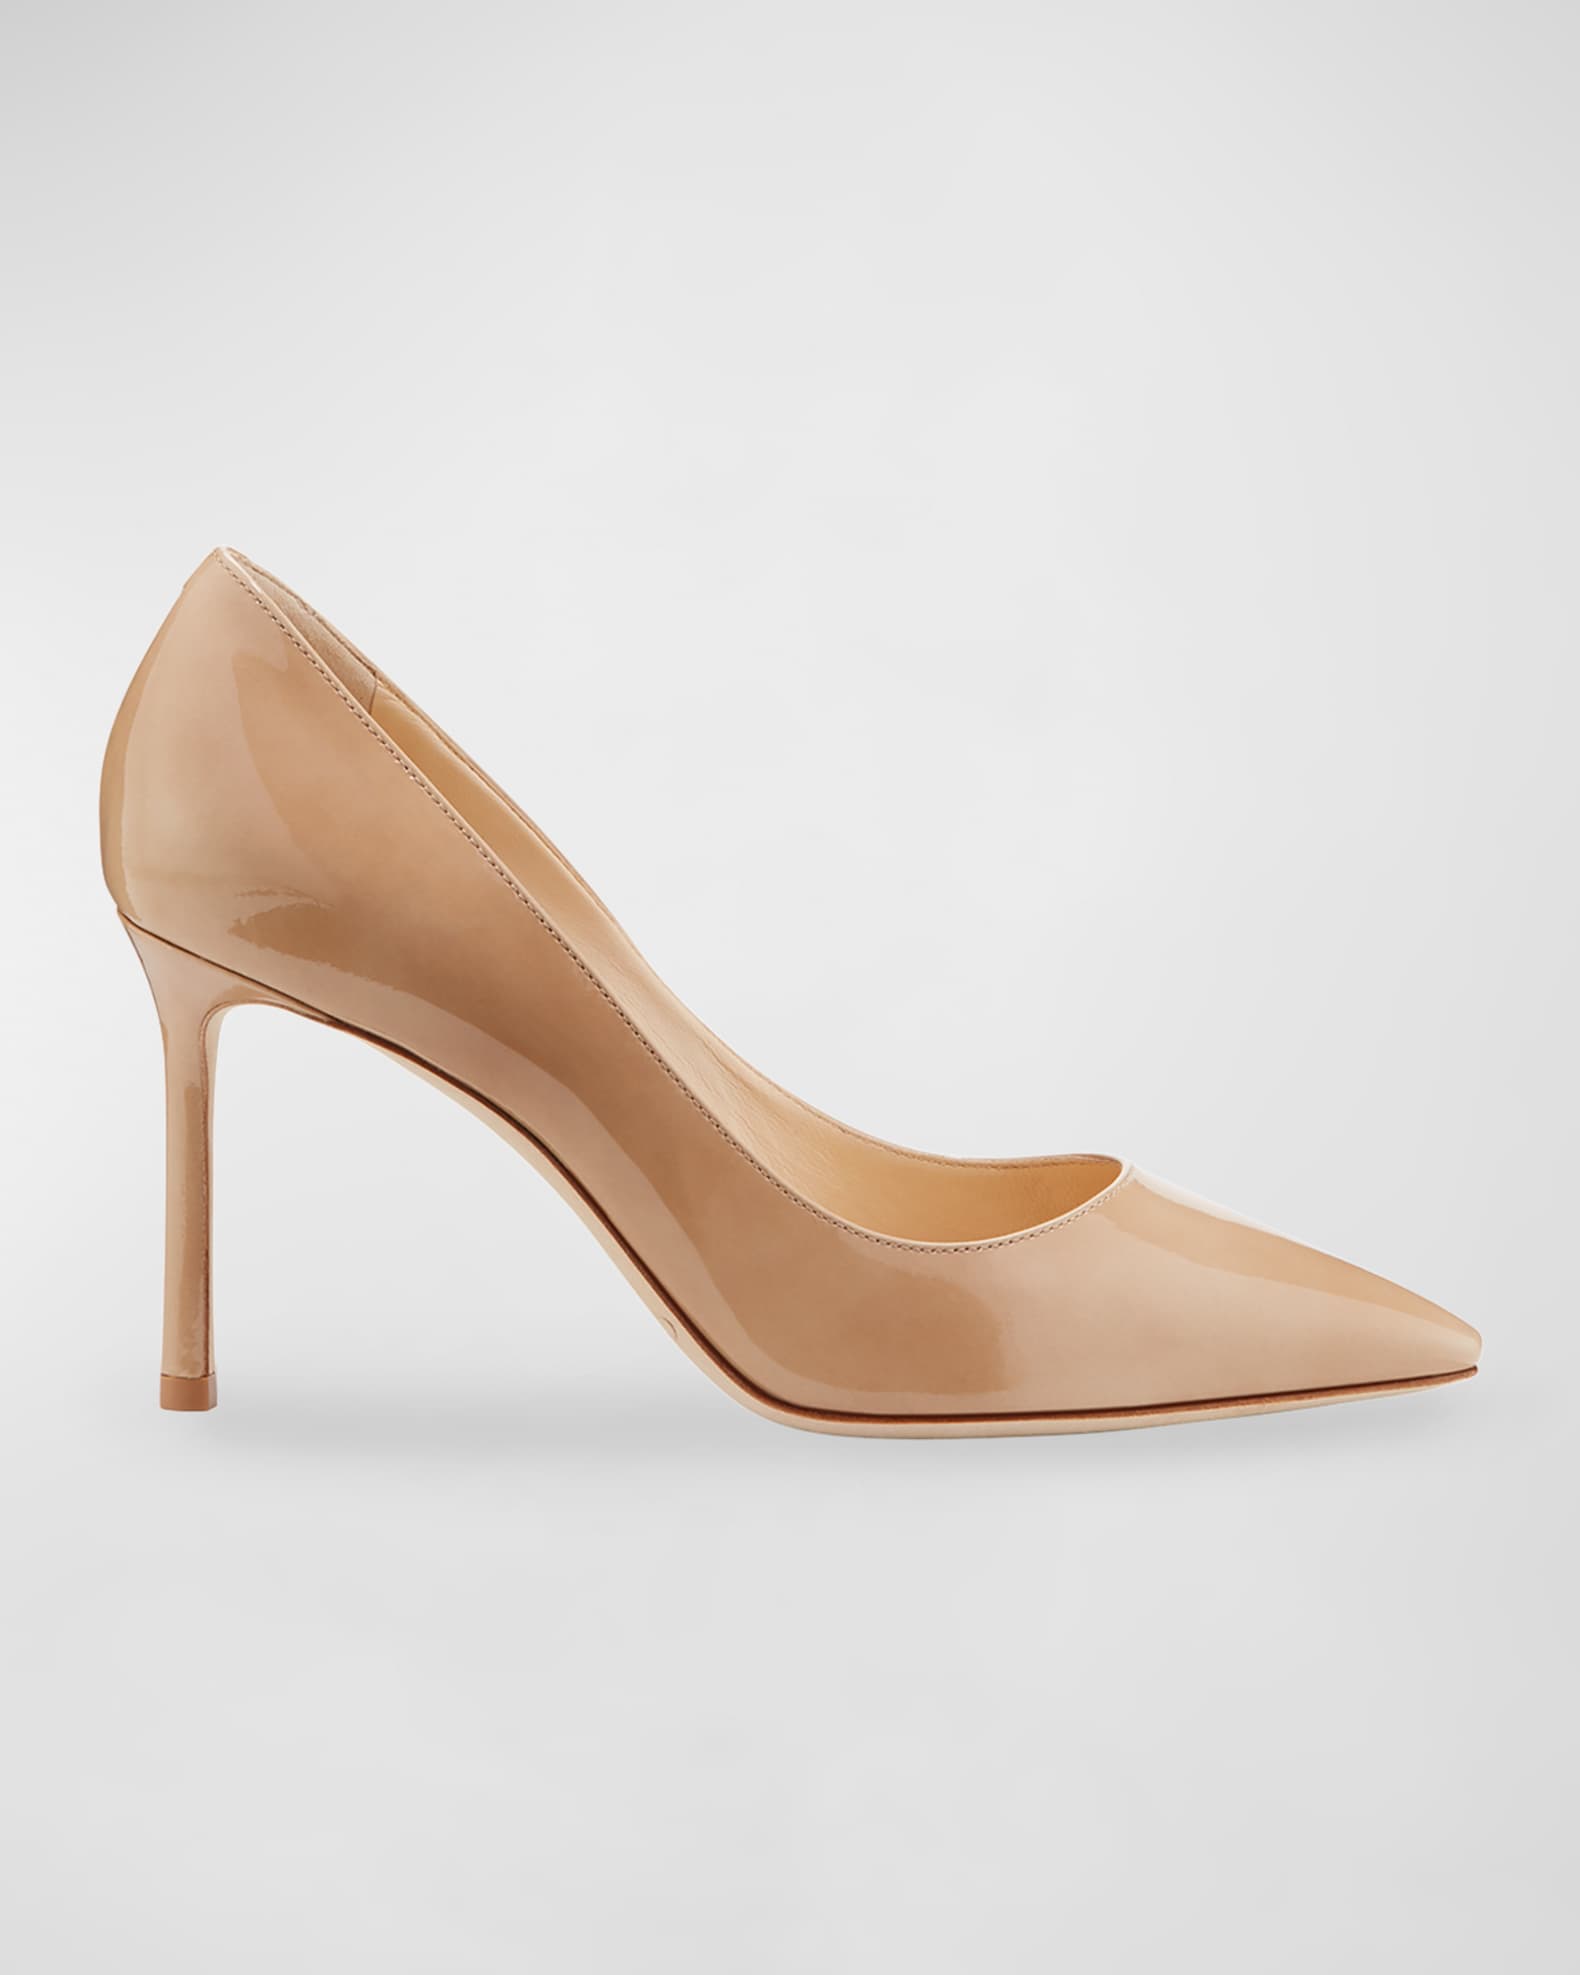 Romy Patent Pointed-Toe 85mm Pump and Matching Items | Neiman Marcus